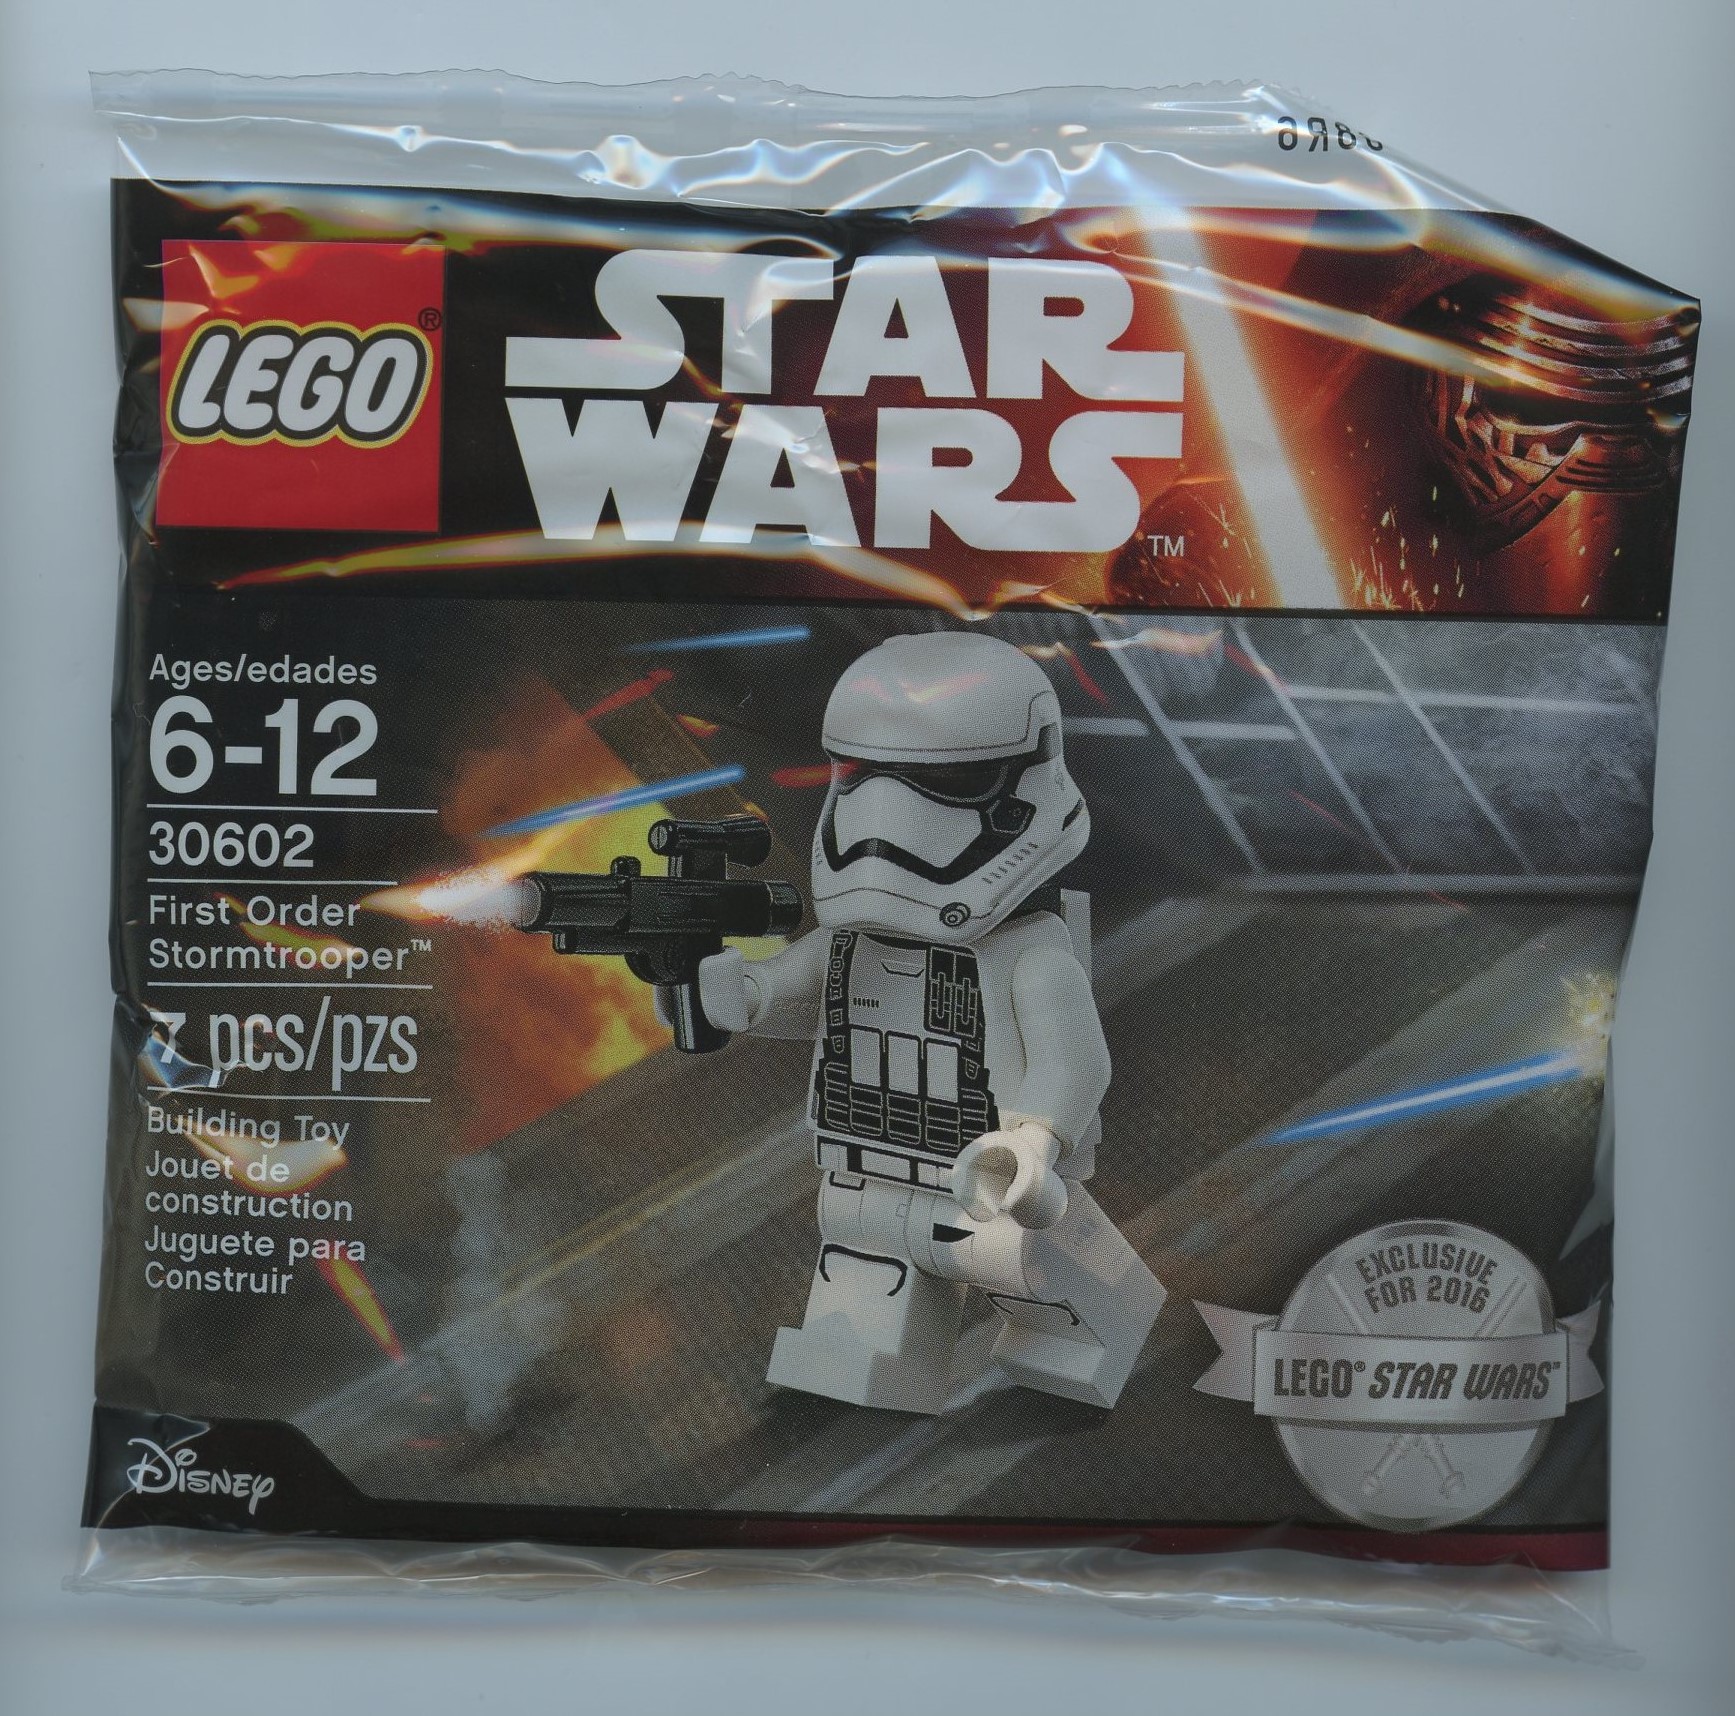 Buying LEGO Star Wars Polybag Sets How to Shop for the Best Price on